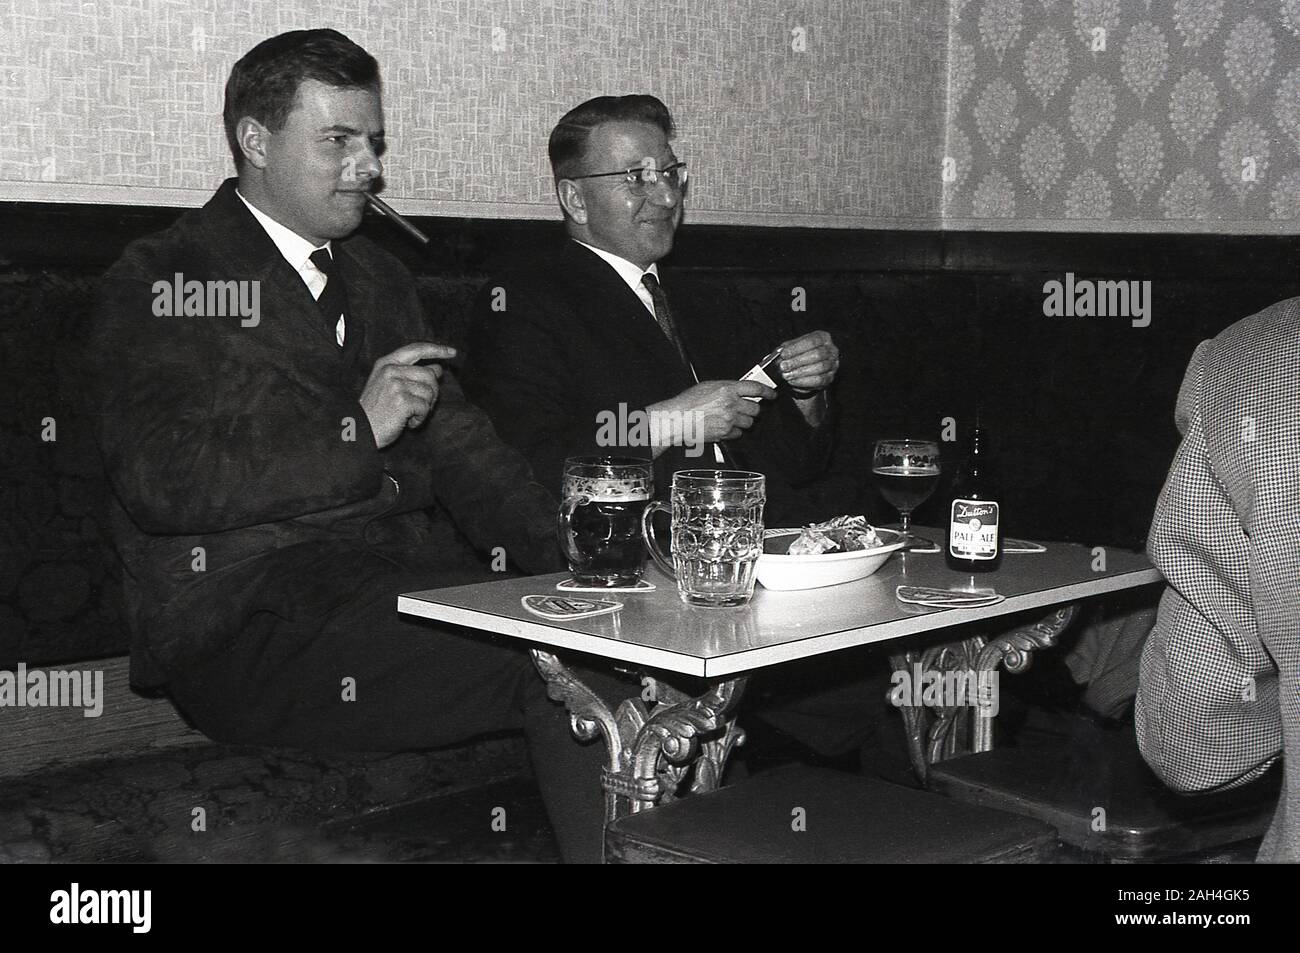 1960s, historical, two well-dressed men sitting in a corner of a bar or pub, drinking beer, with a bottle of Dutton's Pale Ale on the table, England, UK. Stock Photo